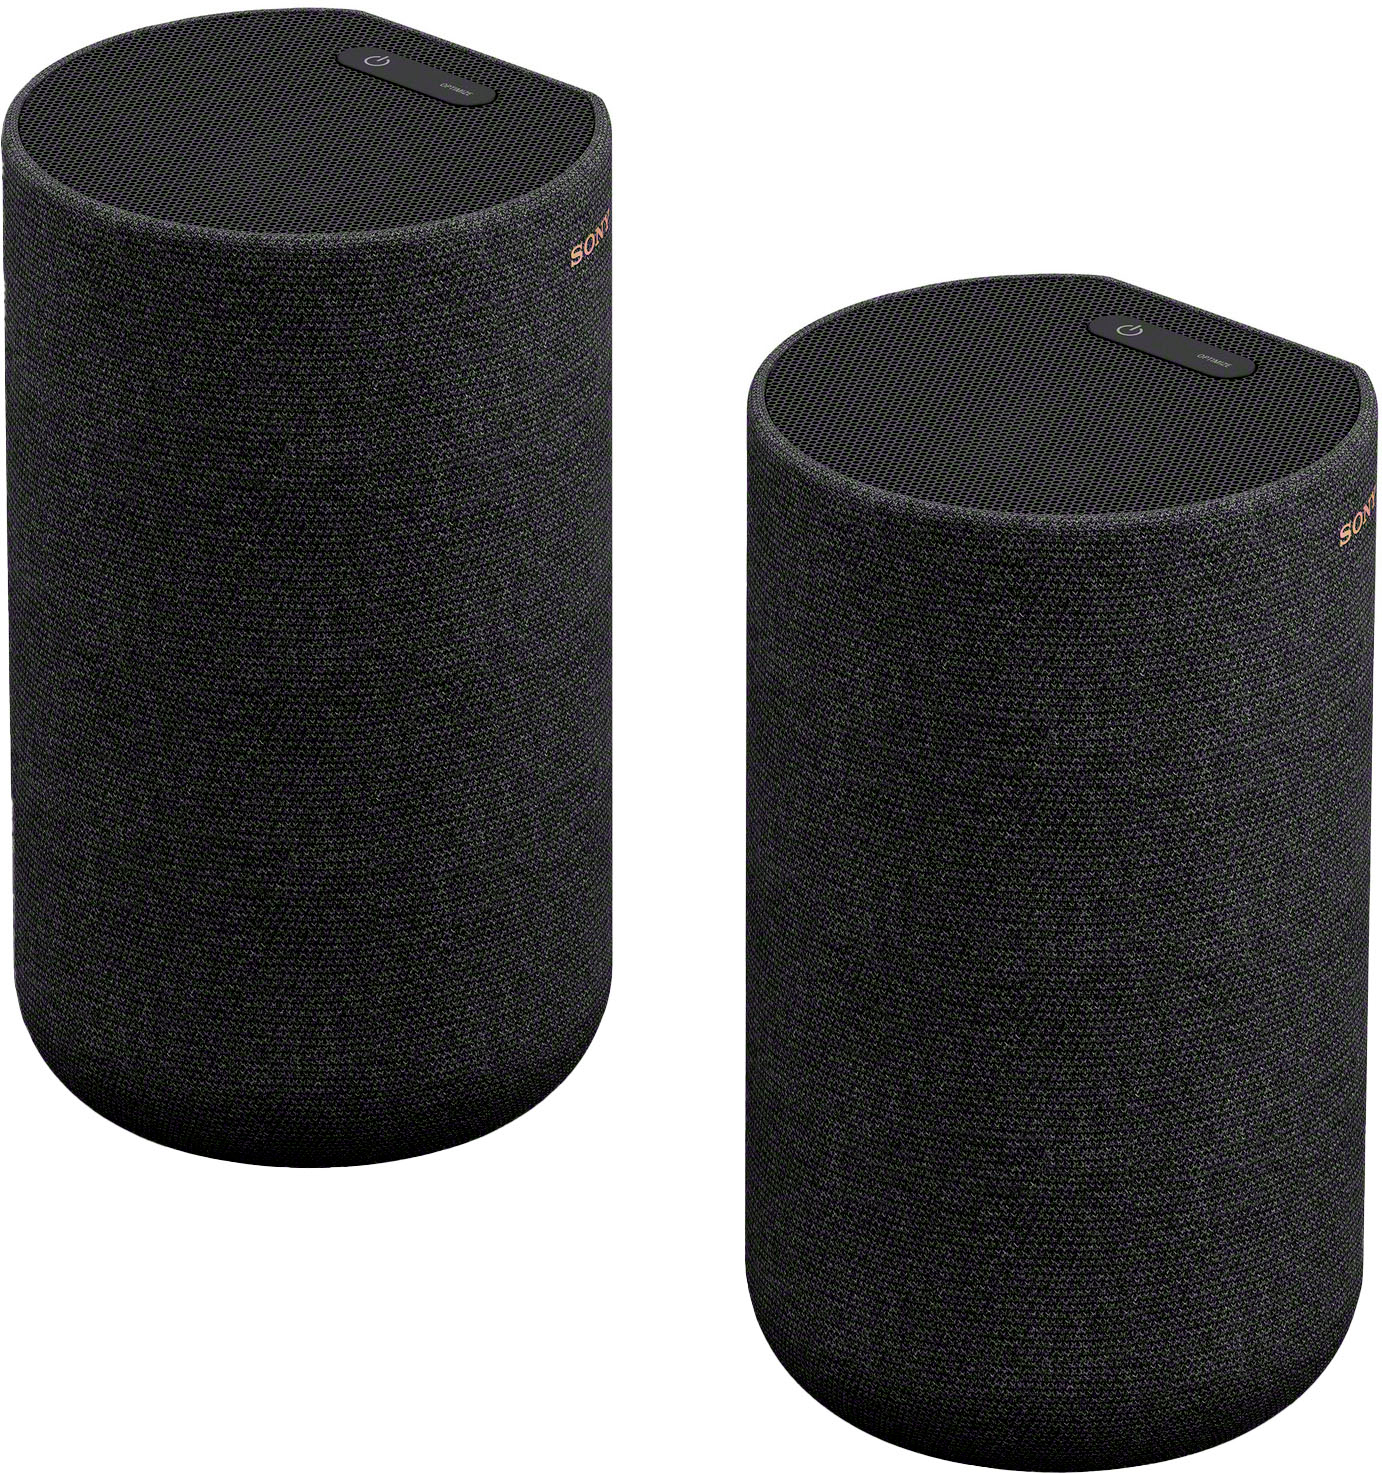 Sony SA -RS5 Wireless Rear Speakers with Built-in Battery for HT 